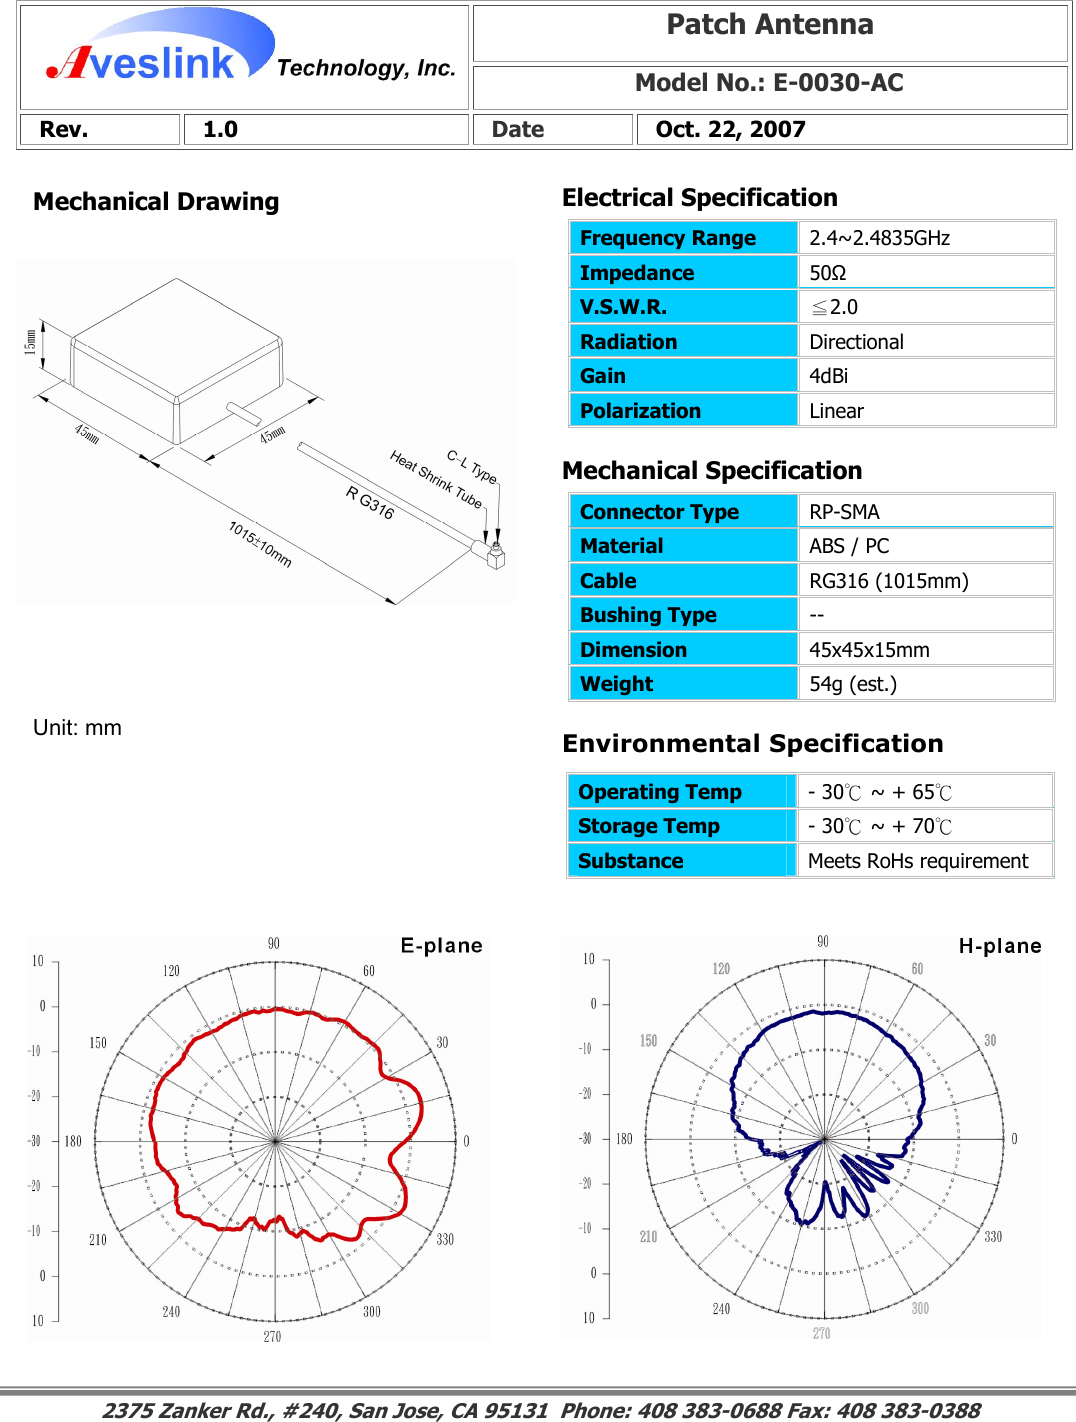 Mechanical DrawingMechanical Specification Environmental SpecificationPatch Antenna Model No.: E-0030-AC Rev.   1.0   Date   Oct. 22, 2007 Connector Type            RP-SMAMaterial  ABS / PC Cable  RG316 (1015mm) Bushing Type  -- Dimension  45x45x15mm Weight  54g (est.)                                                                                                                                                                                                                        2375 Zanker Rd., #240, San Jose, CA 95131  Phone: 408 383-0688 Fax: 408 383-0388 Operating Temp  - 30℃ ~ + 65℃  Storage Temp  - 30℃ ~ + 70℃  Substance  Meets RoHs requirement Electrical SpecificationFrequency Range   2.4~2.4835GHz Impedance  50Ω V.S.W.R.  ≦2.0 Radiation  Directional Gain  4dBi Polarization  Linear Unit: mm 